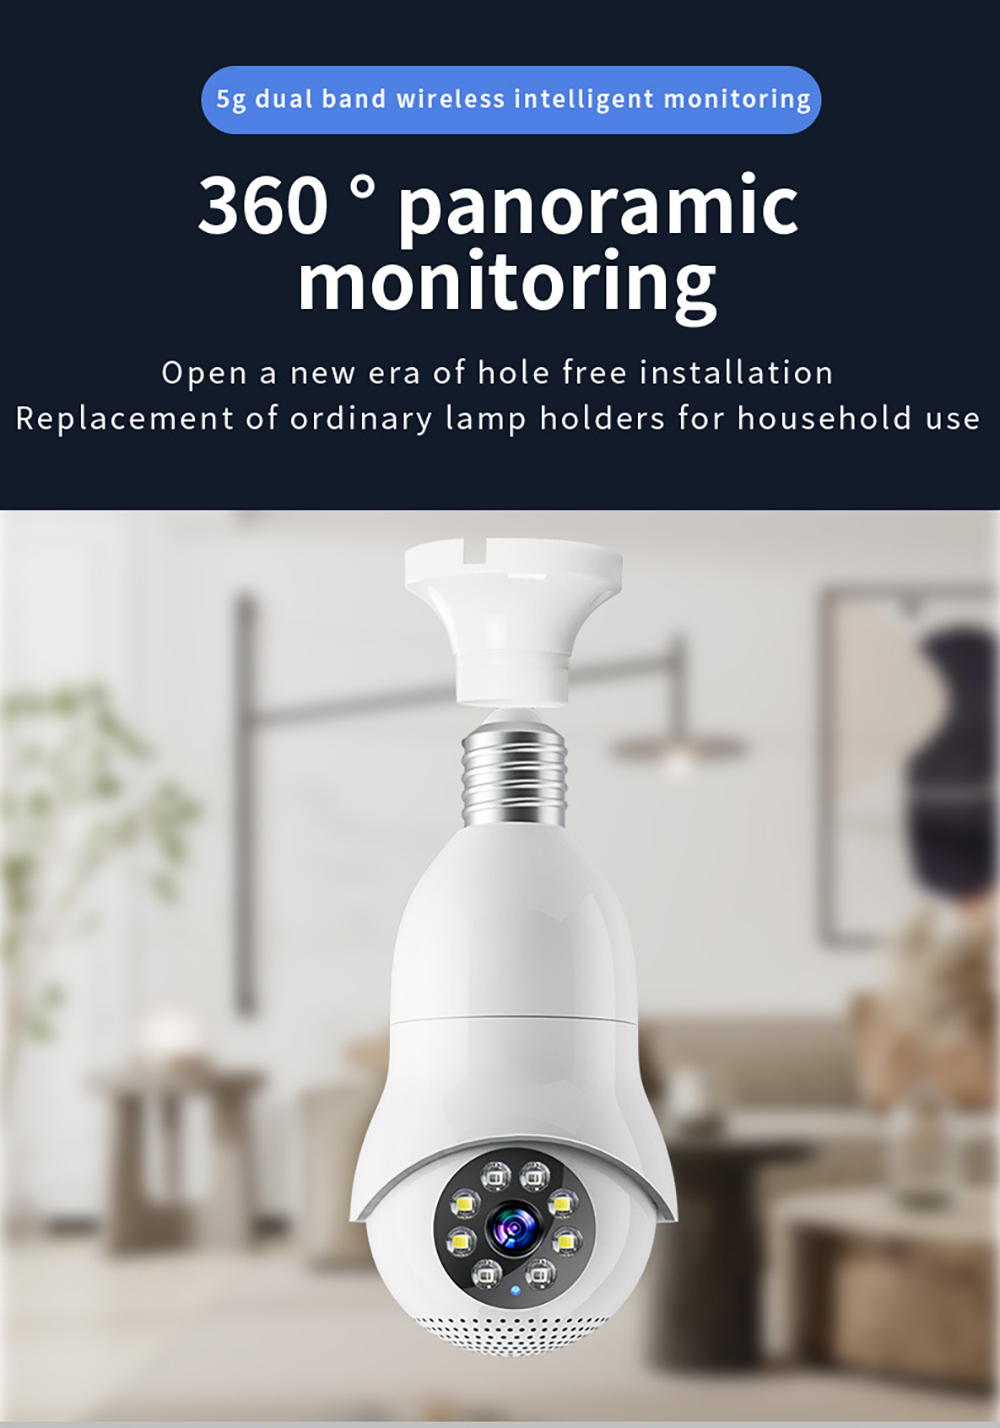 WiFi iP Bulb Camera with Lamp Holder 5G 1080P Wireless Night Vision Color Motion Detection Two-way Audio AP Hotspot Video Playback Home Security Camera